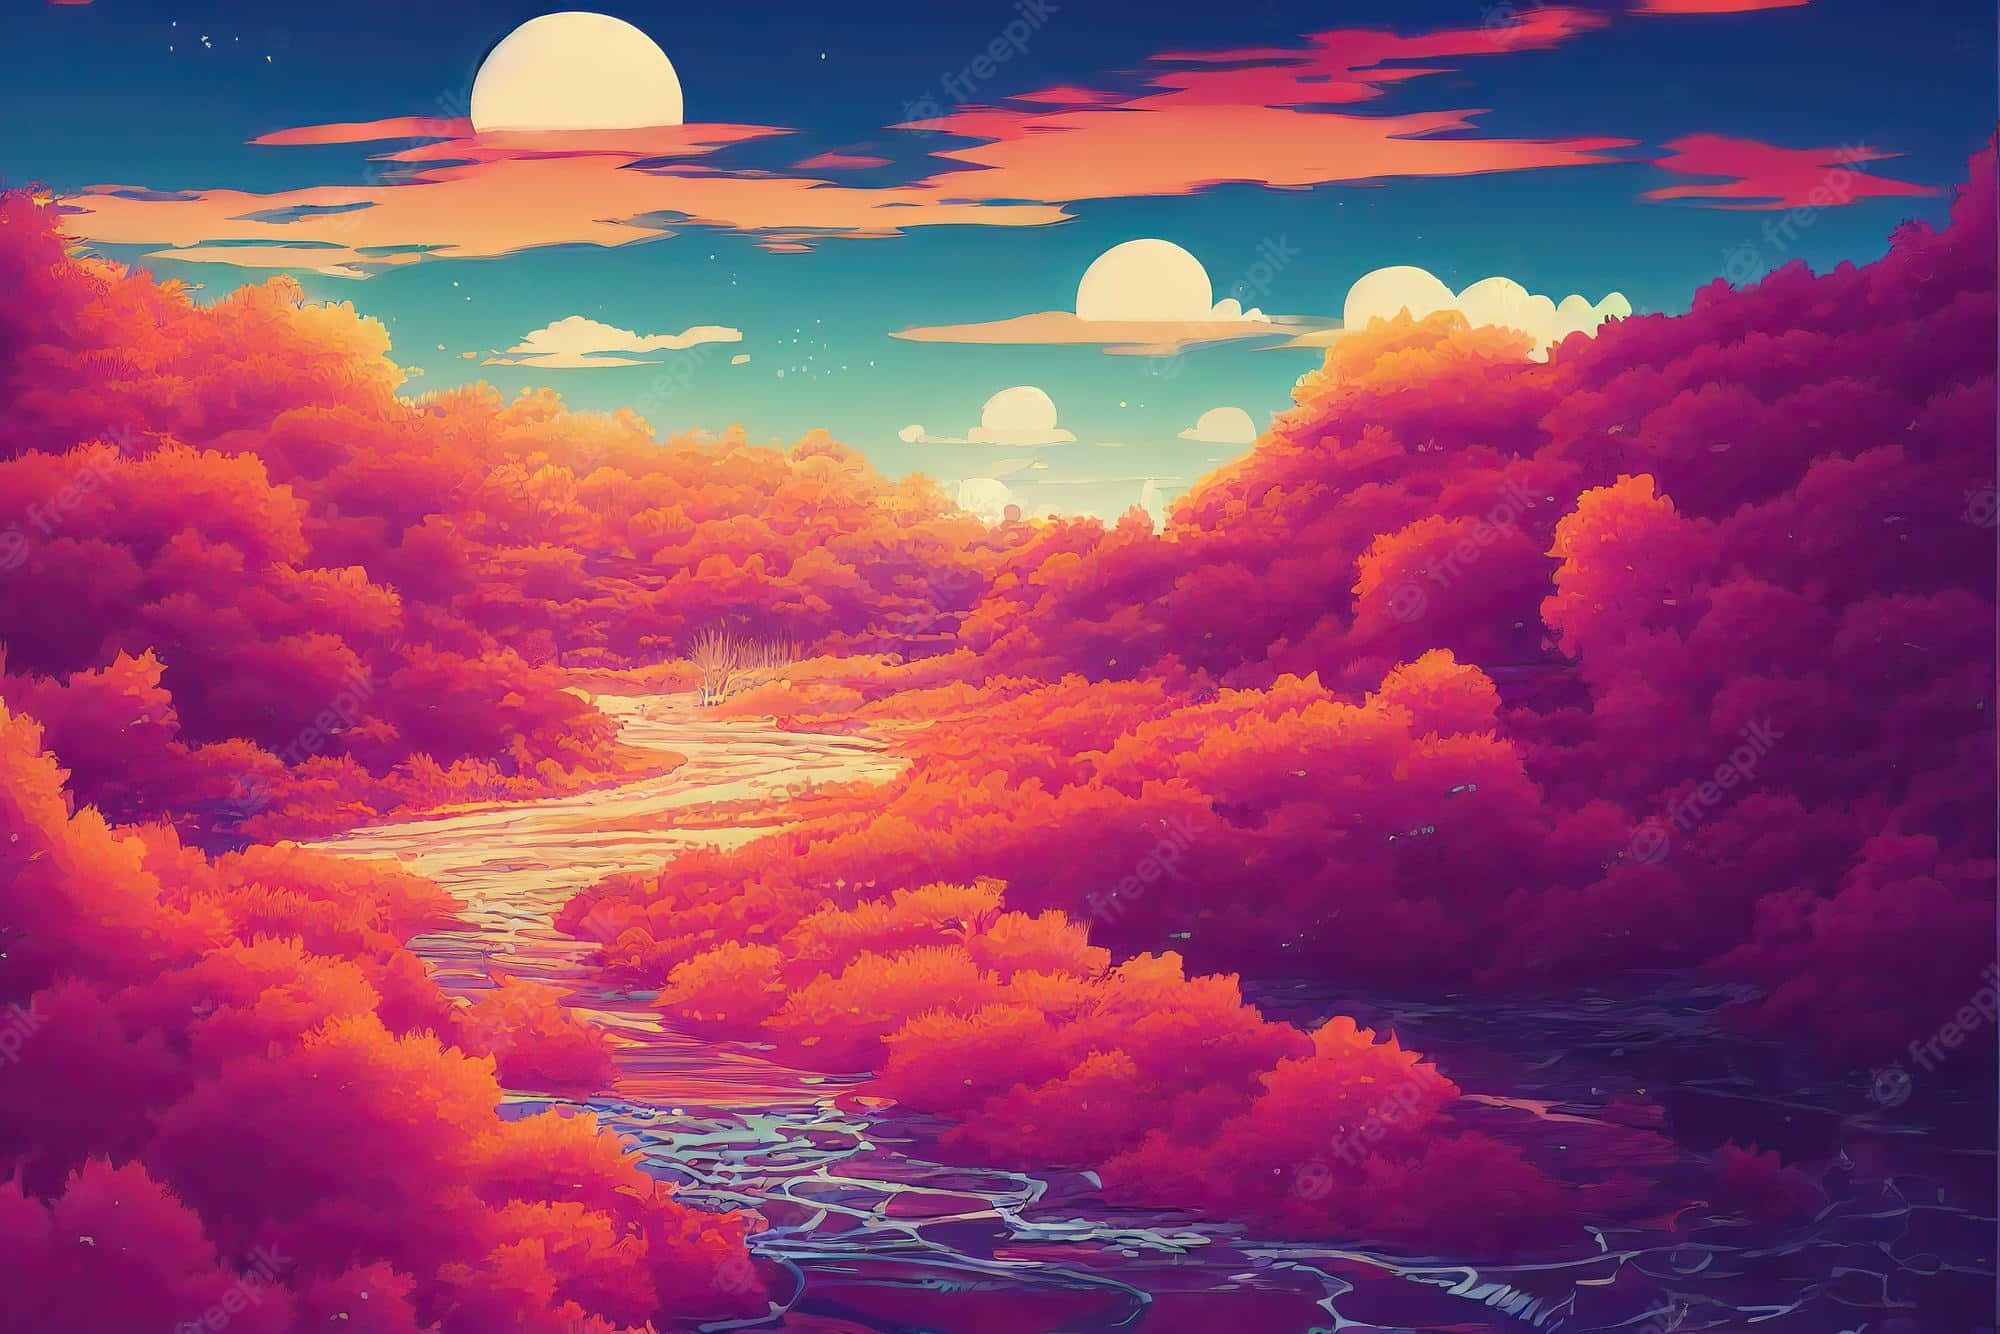 Stimulate your senses with a vibrant red Aesthetic Anime Laptop Wallpaper